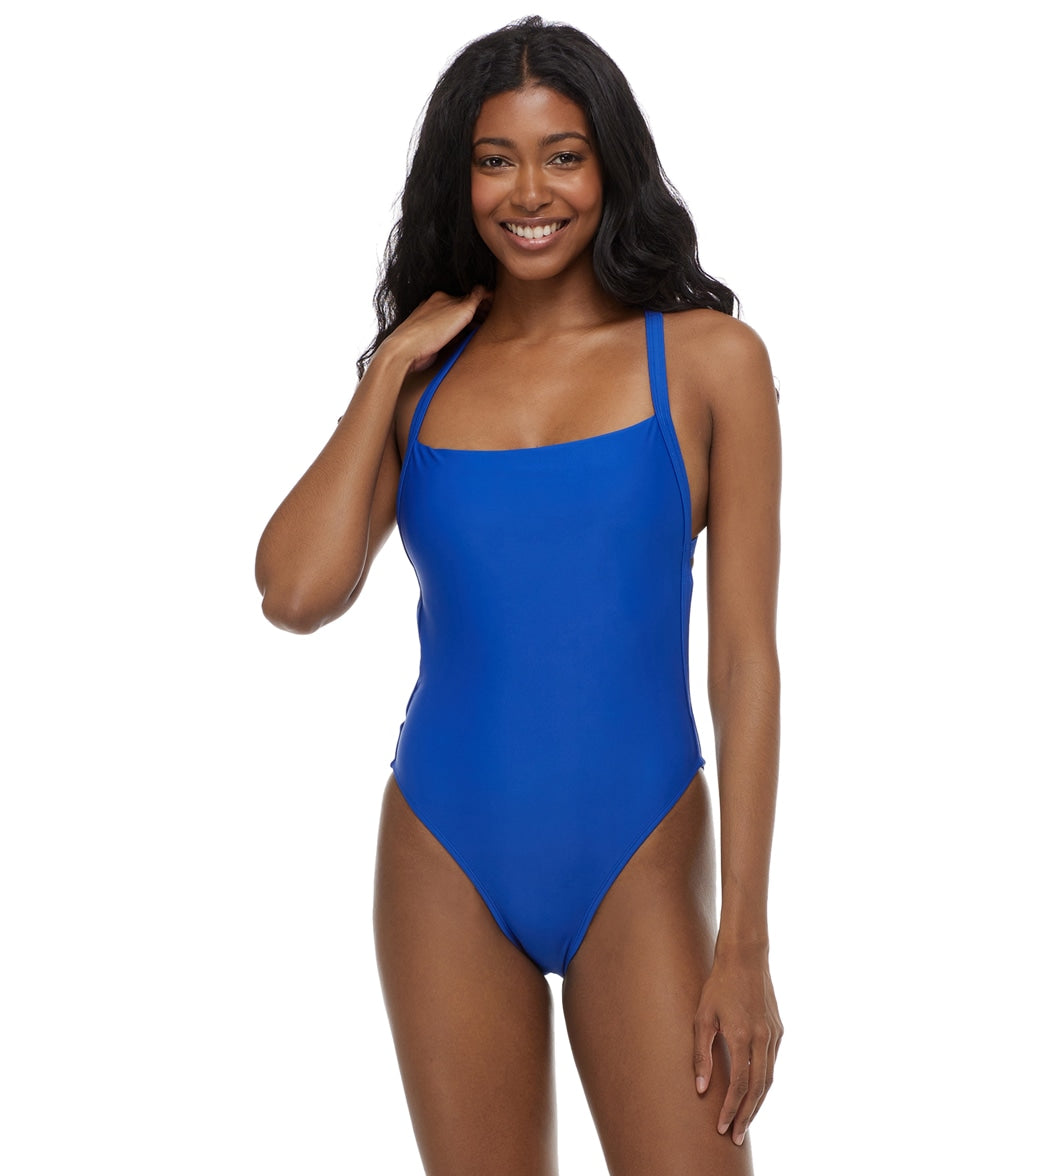 Body Glove Smoothies Electra One Piece Swimsuit